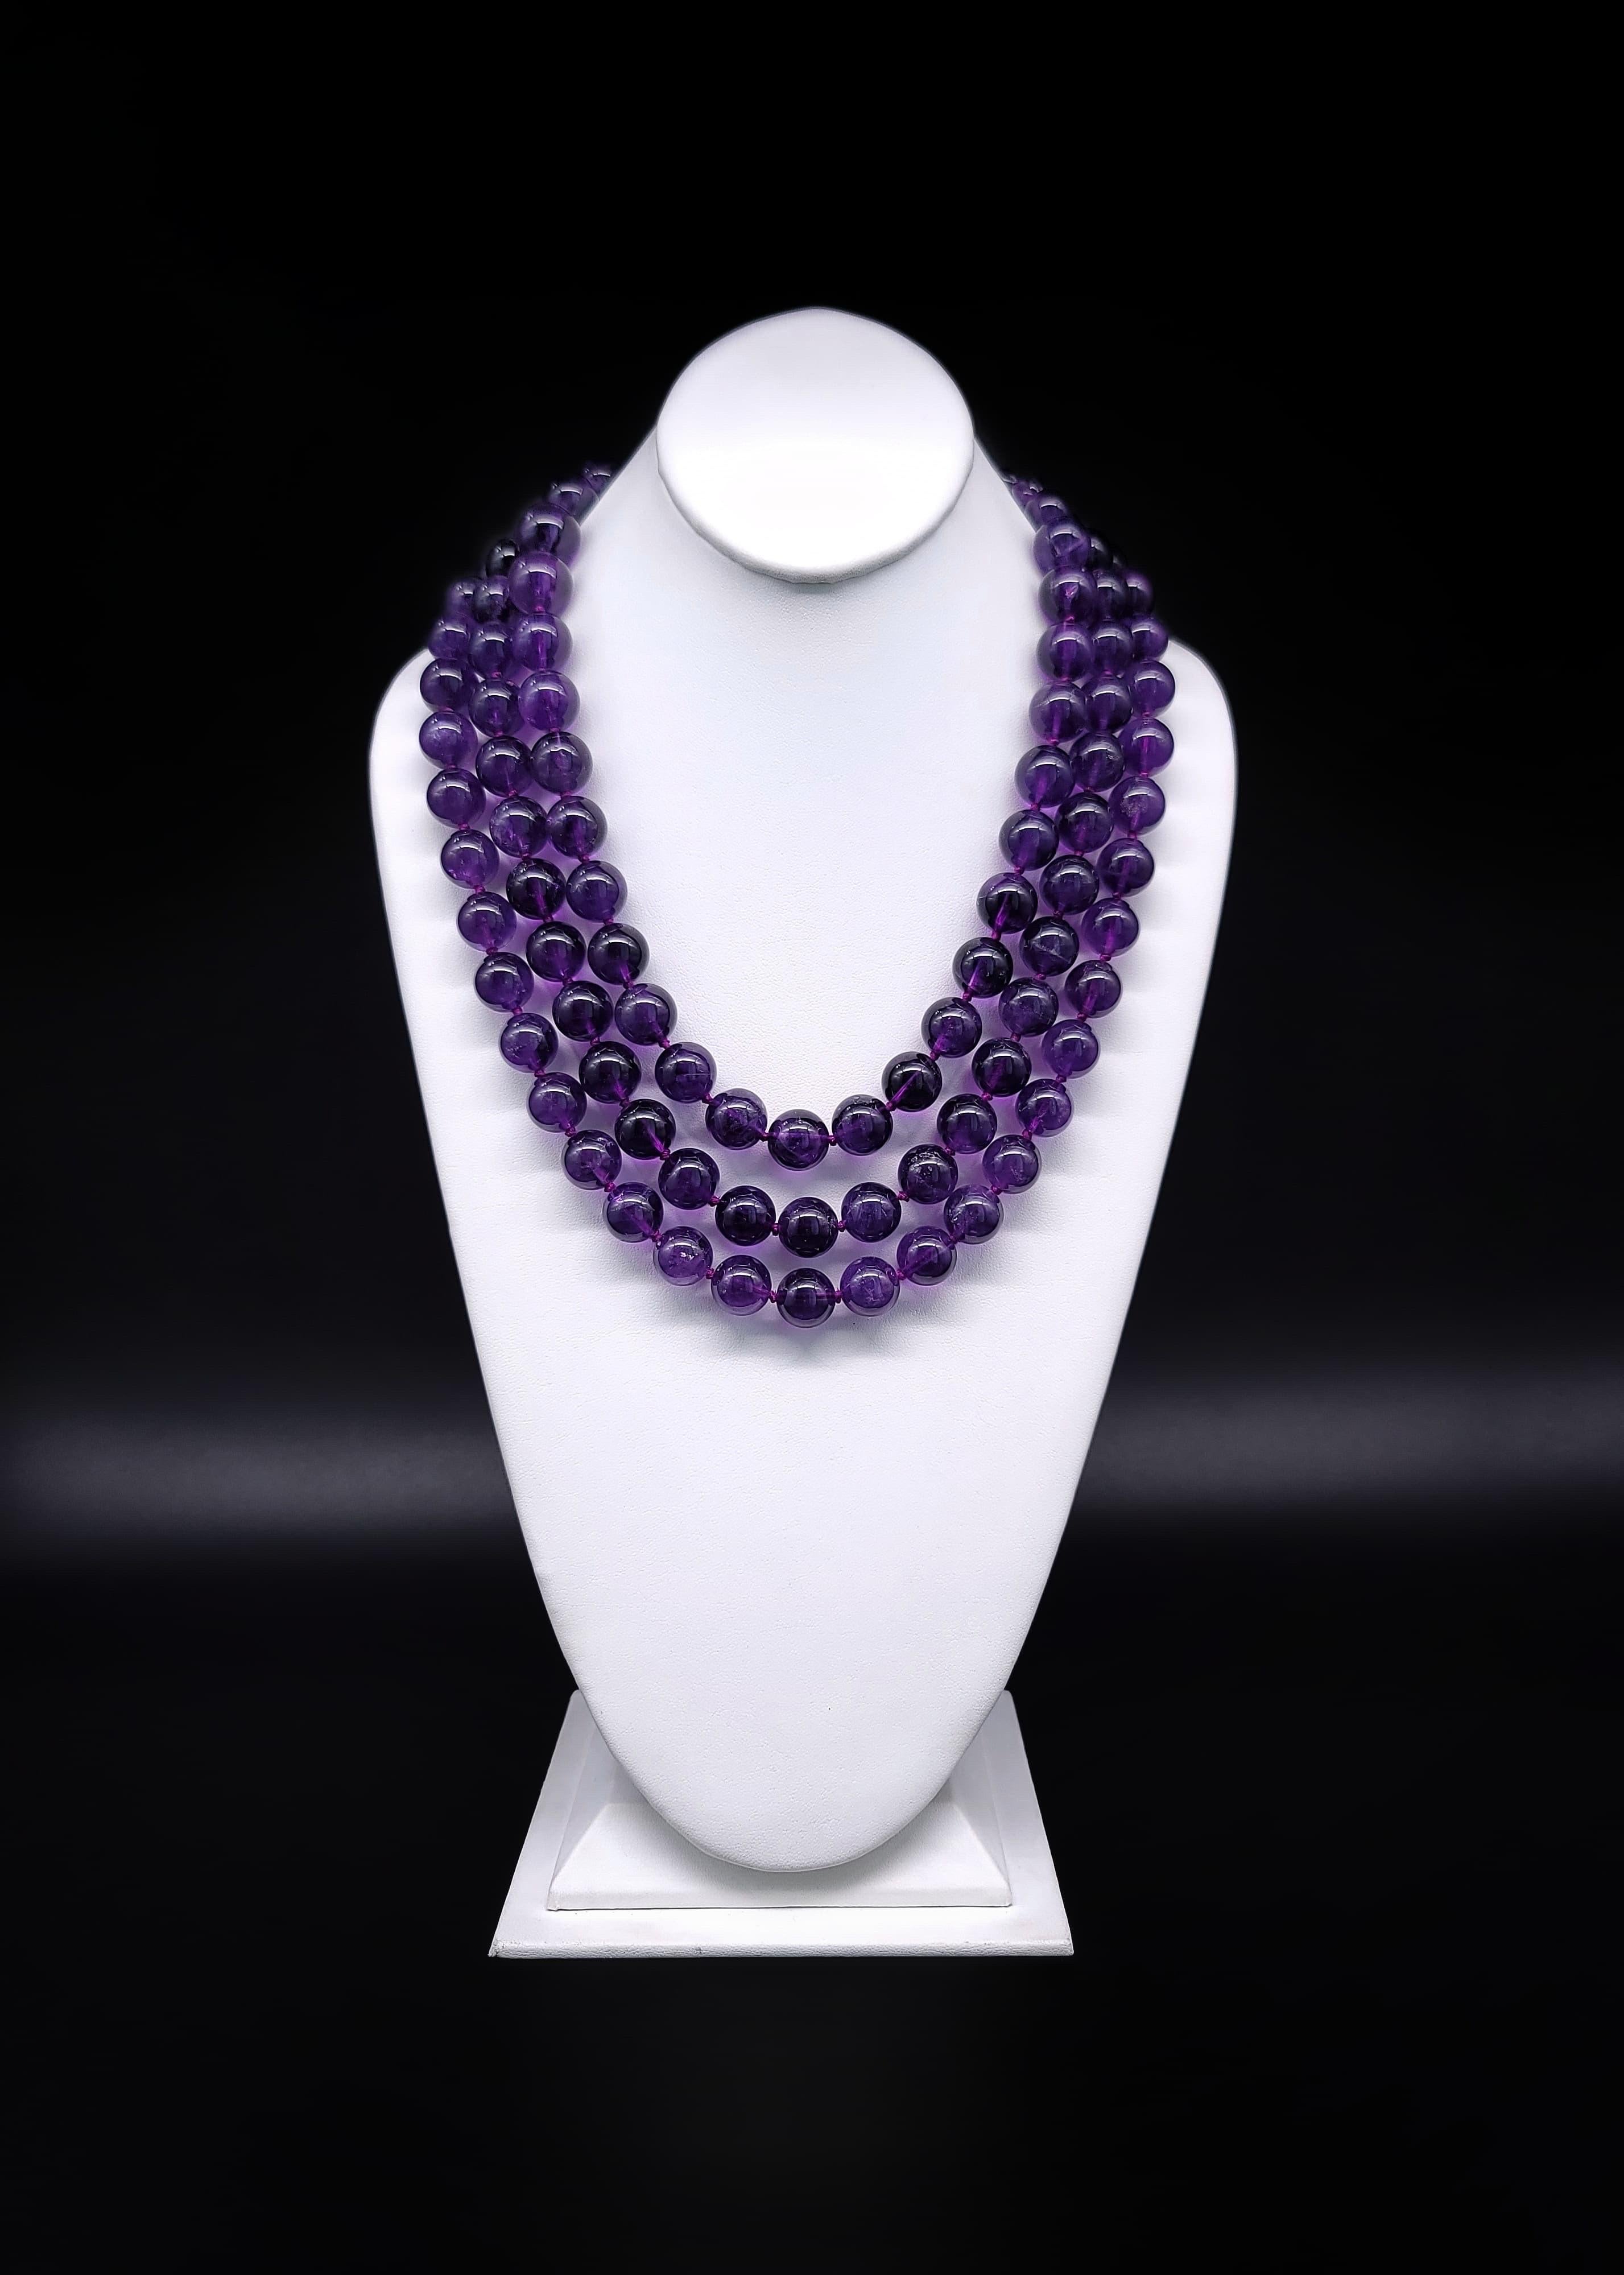 A.Jeschel  Amethyst necklace with a Vintage Venetian glass clasp. 5